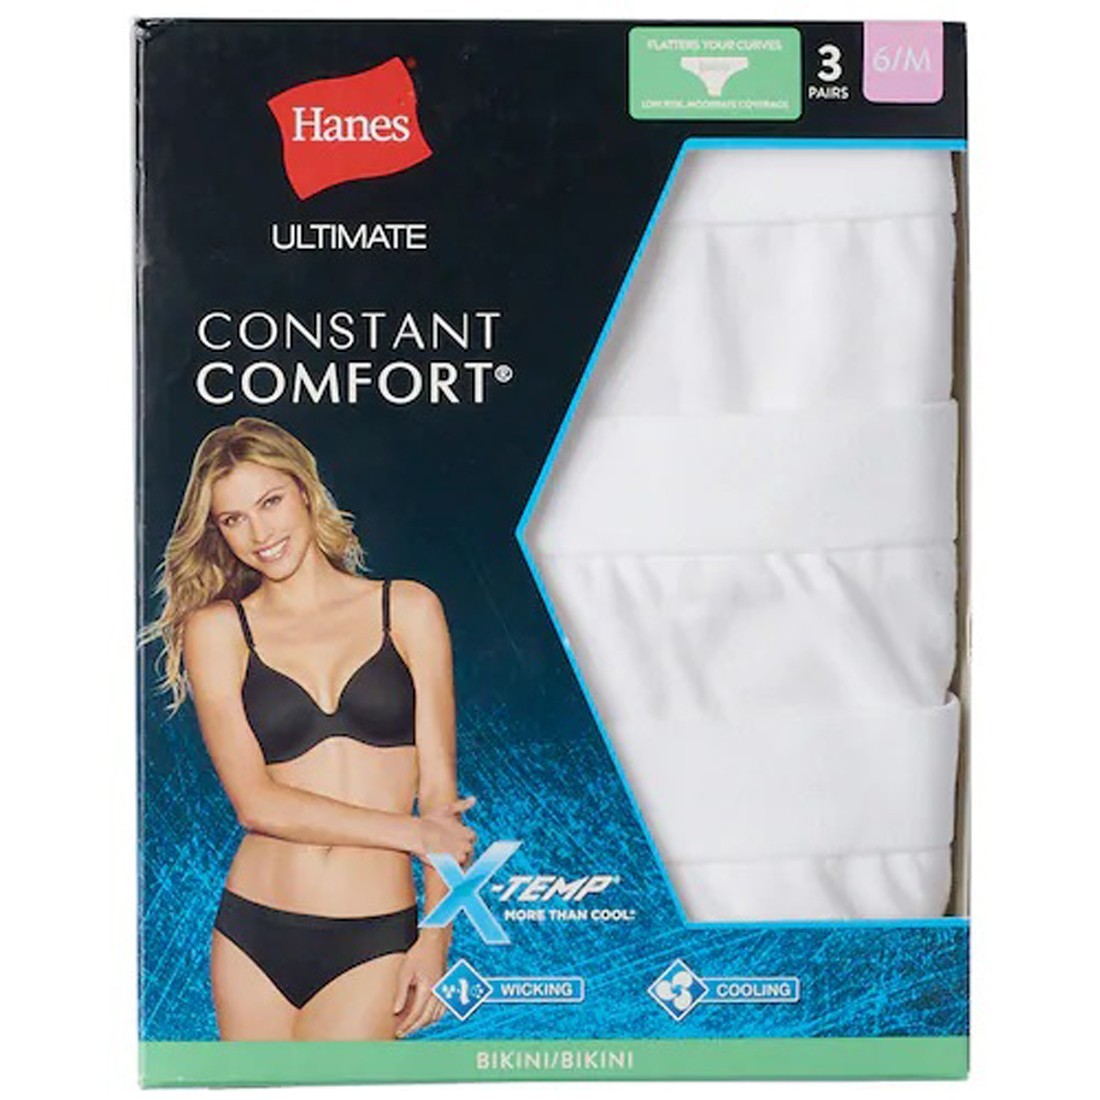 Shop Hanes Ultimate 3-pack Constant Comfort X-Temp Bikini Panties 42XT -  Hanes, delivered to your home